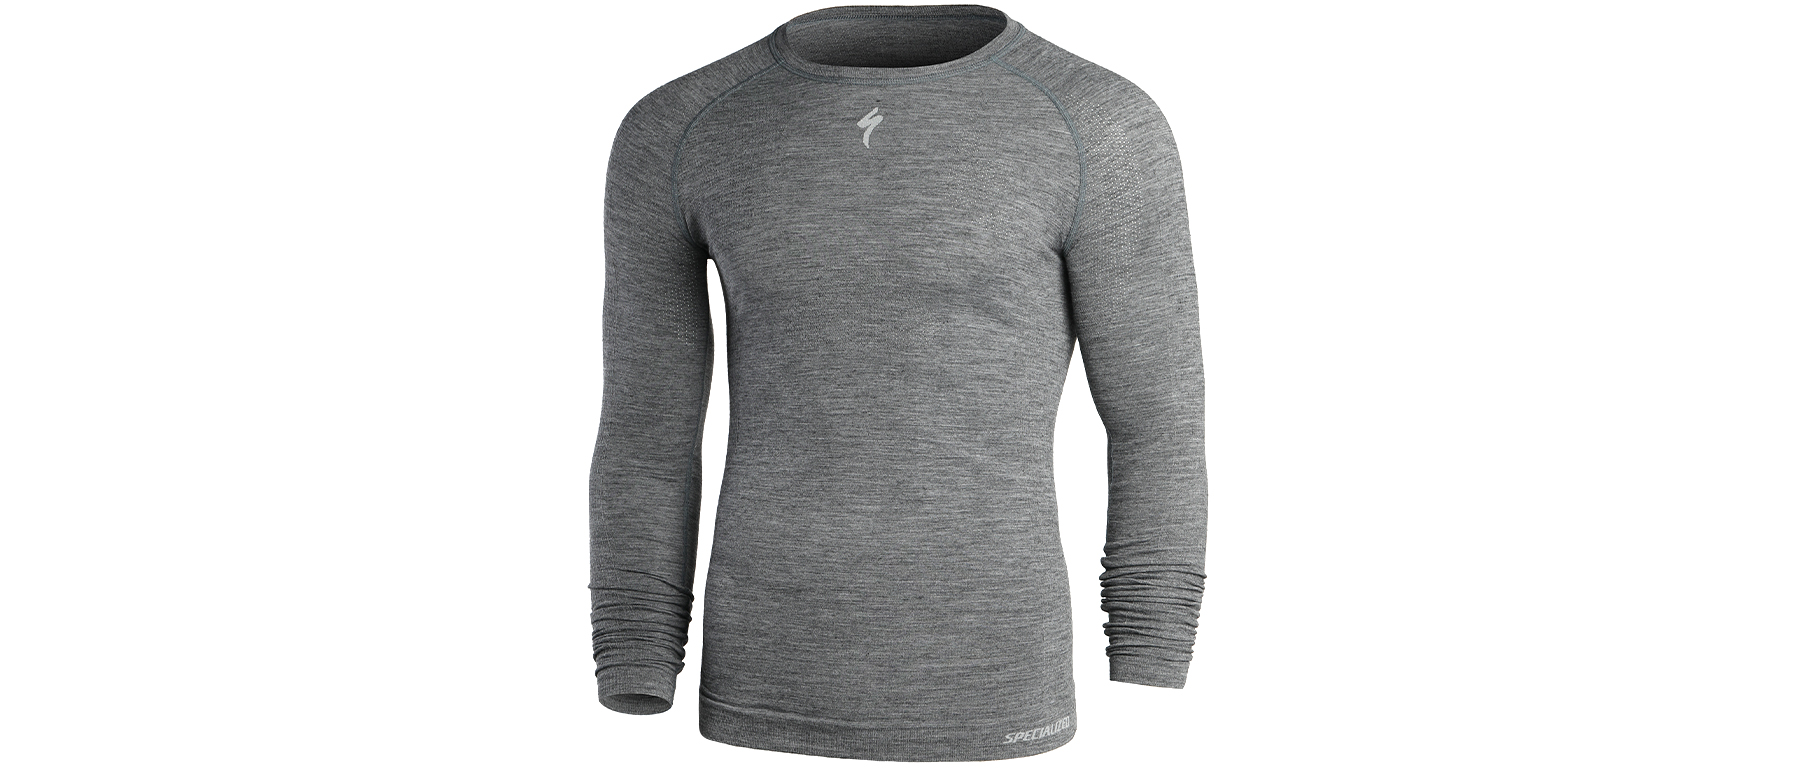 Specialized Seamless Merino LS Base Layer